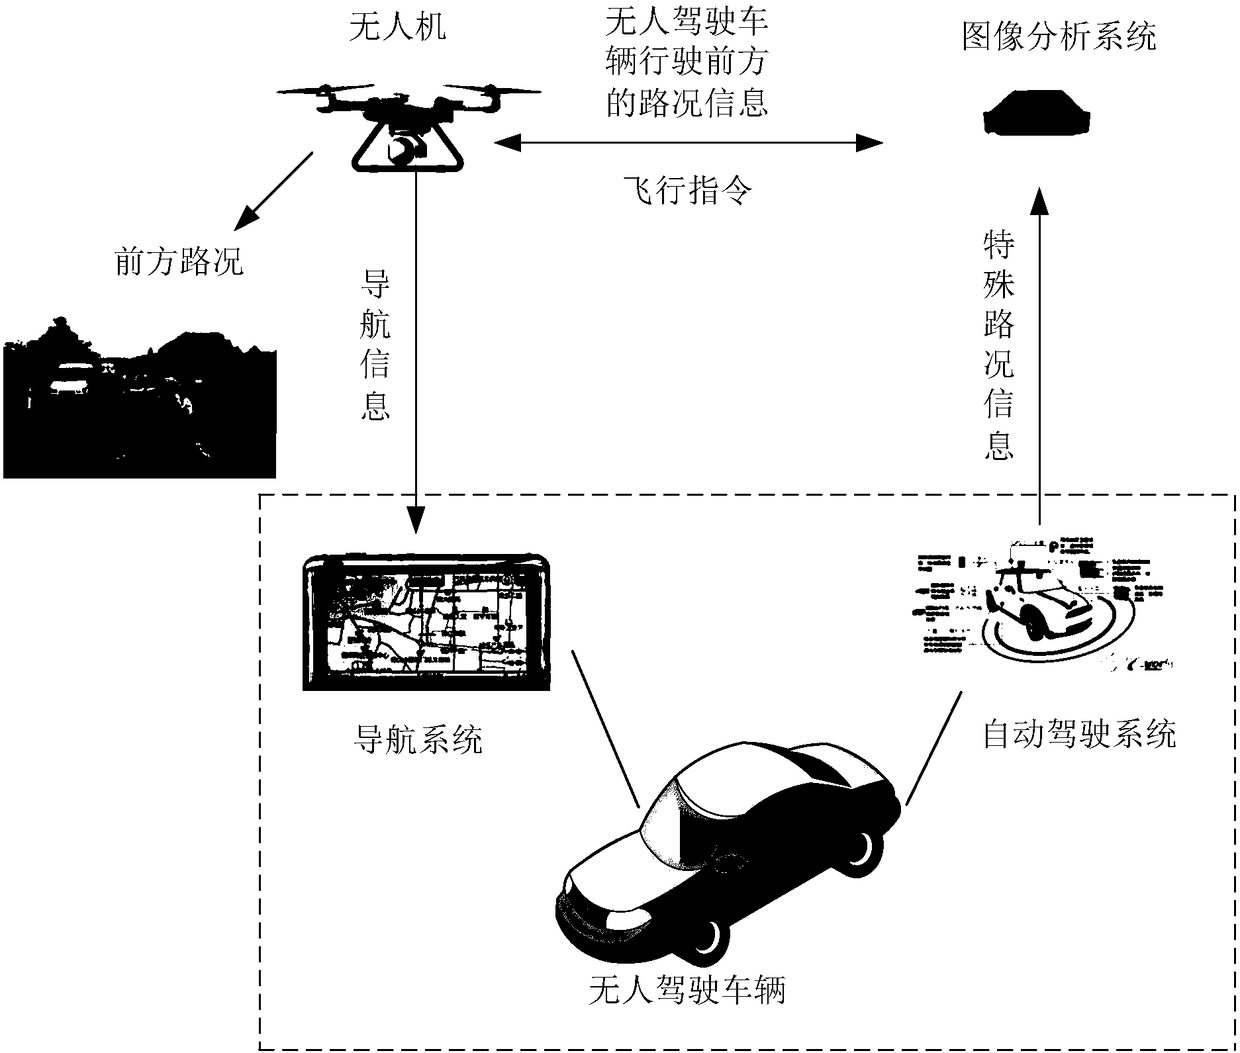 Unmanned aerial vehicle (UAV) based unmanned vehicle control method and device and storage medium